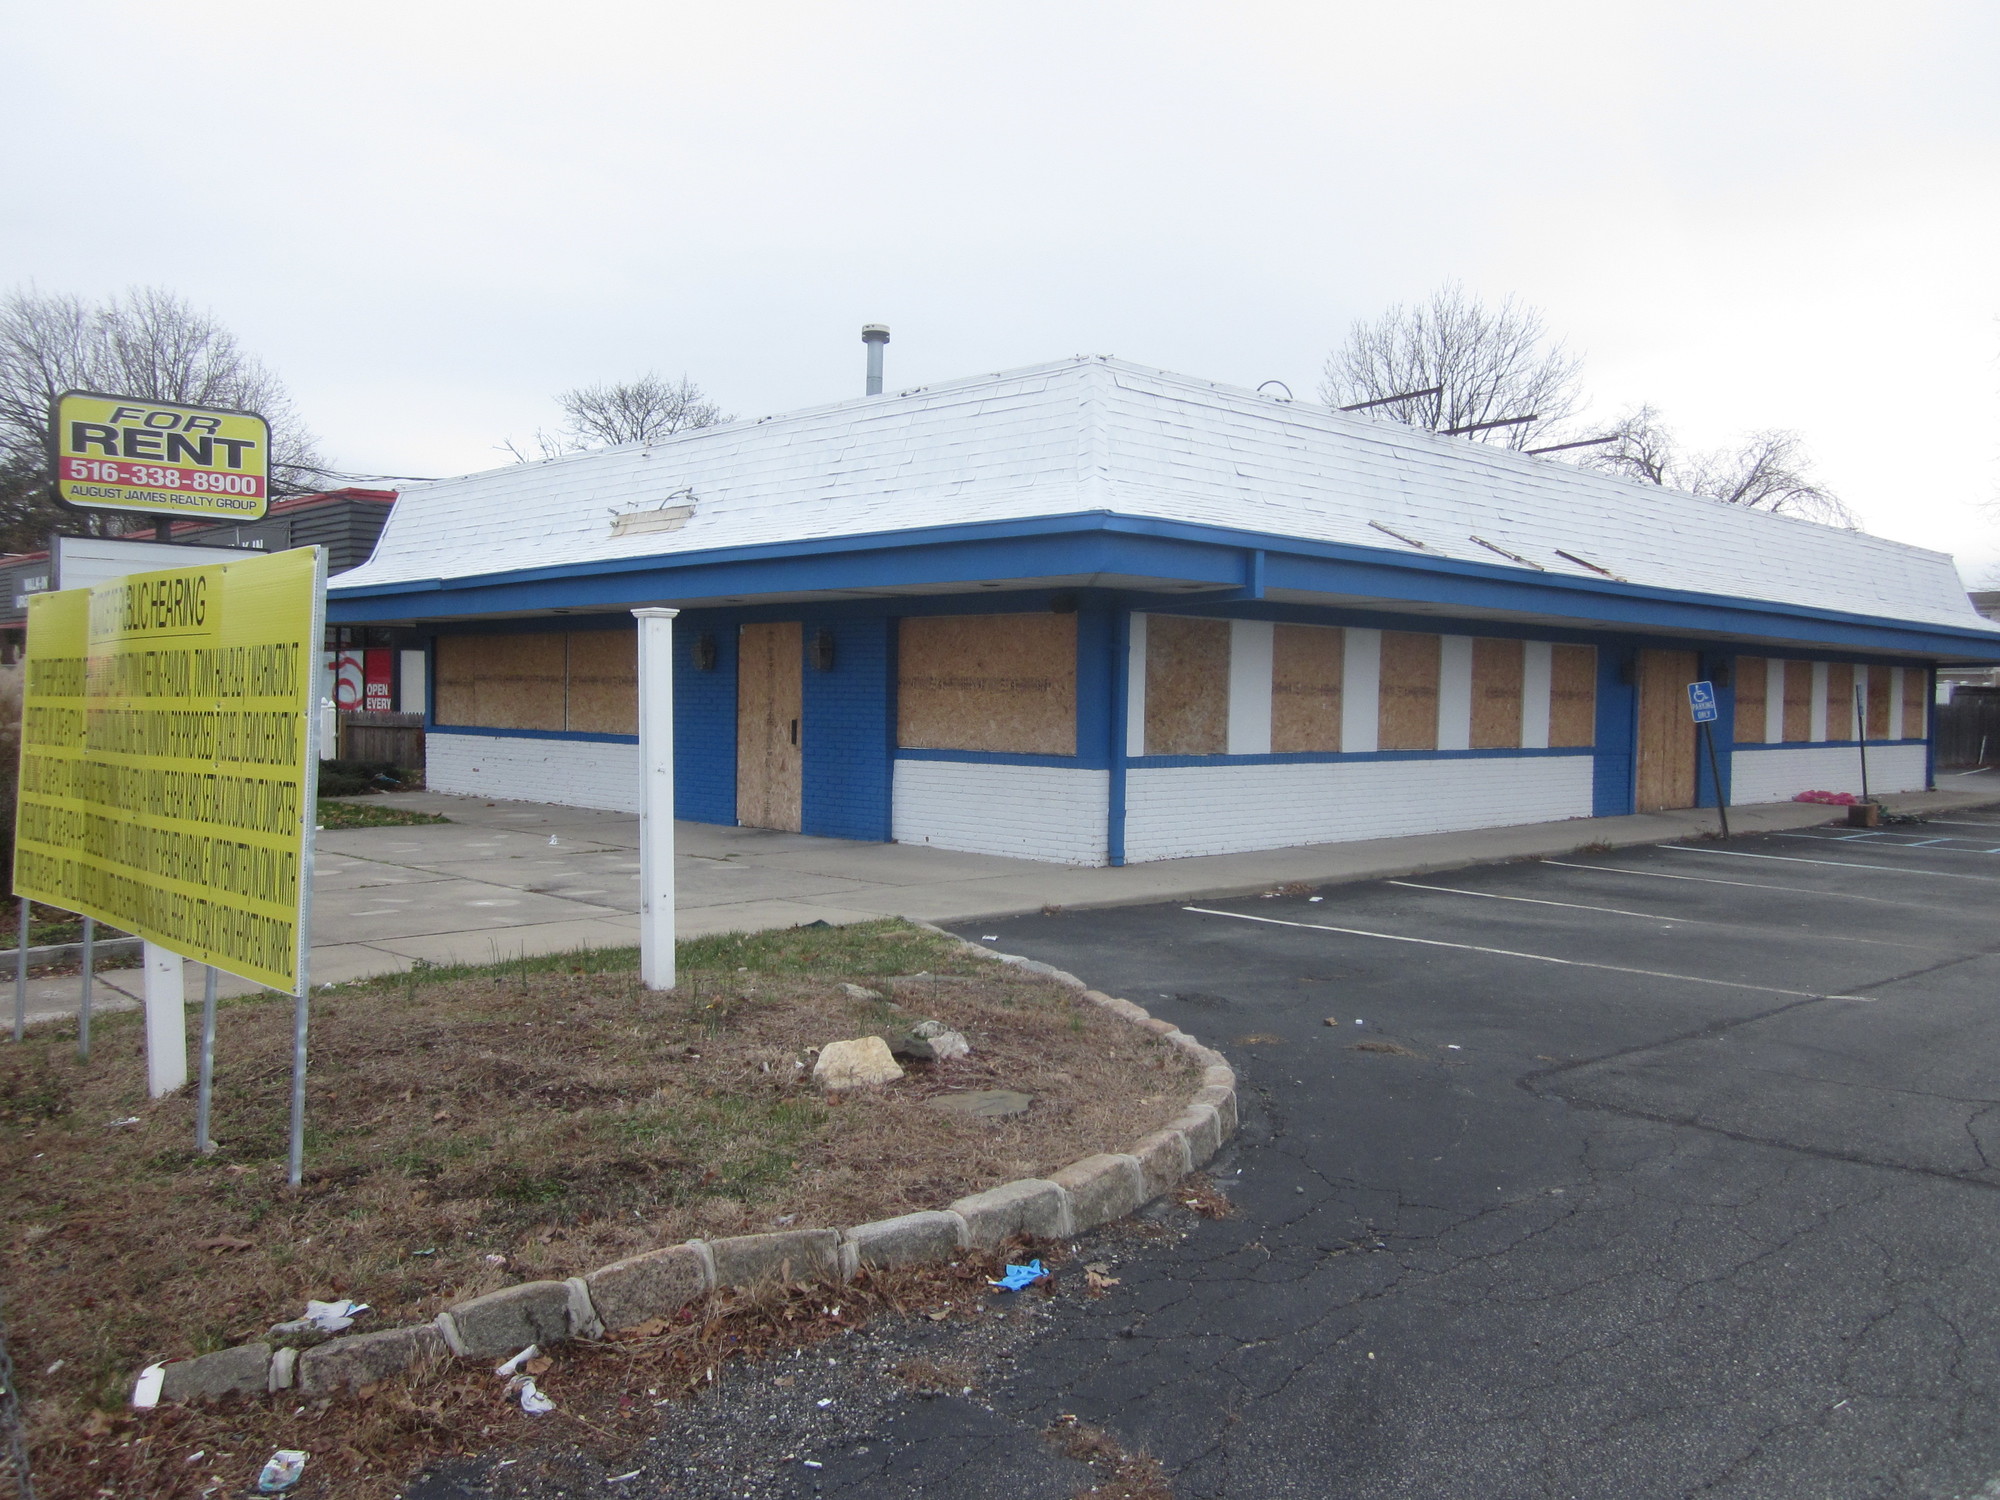 A proposal to construct a Taco Bell with a drive-through at 1939 Hempstead Turnpike is currently before the Town of Hempstead’s Board of Appeals, to the chagrin of many residents.